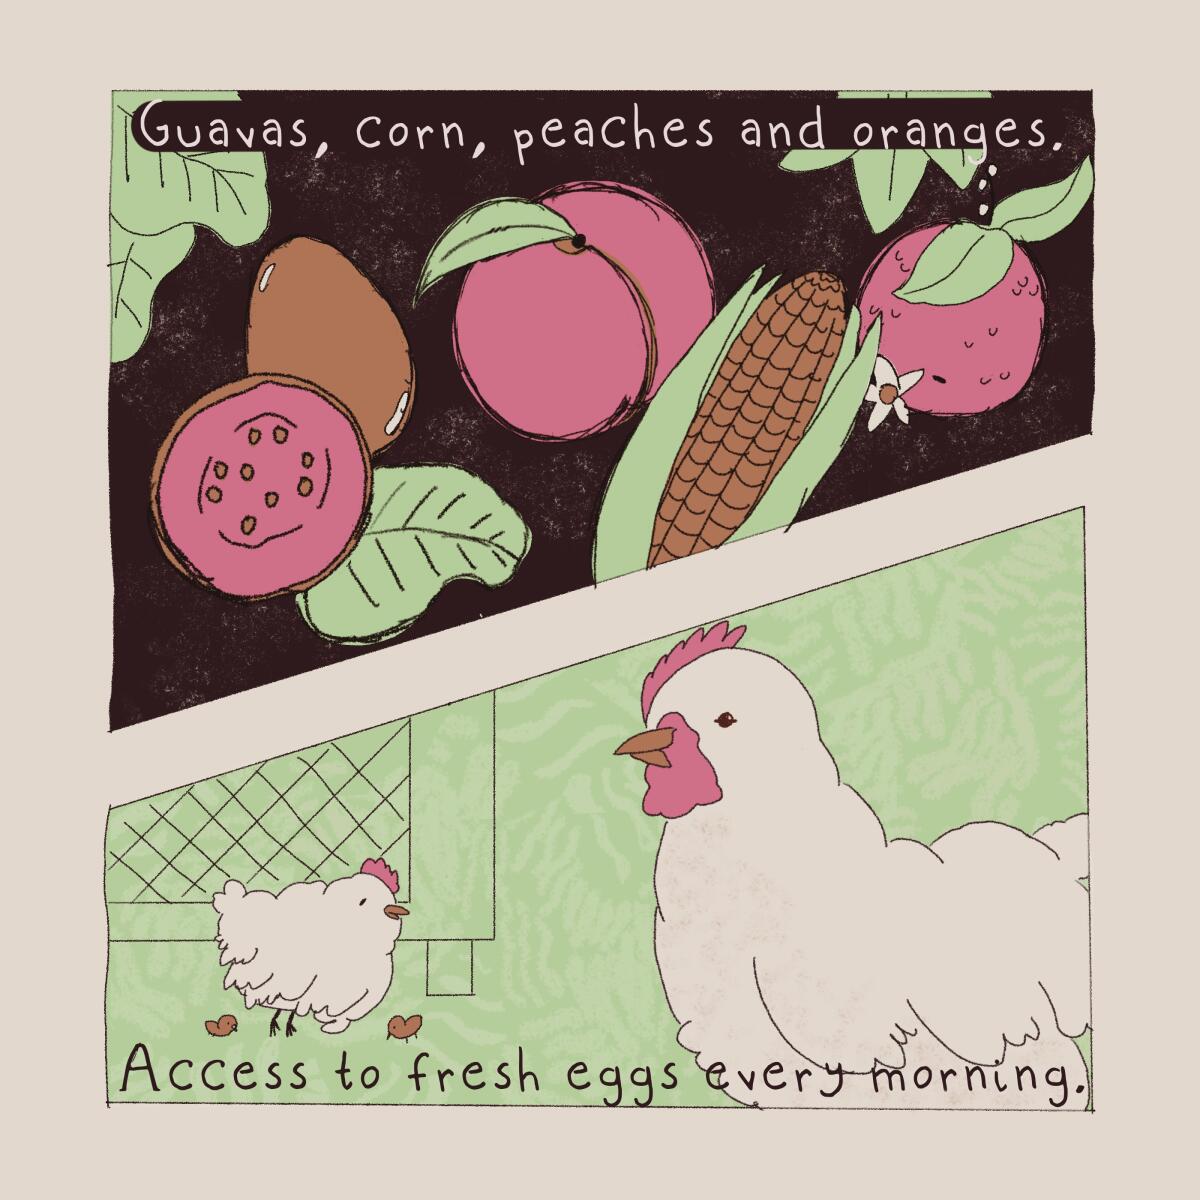 Guavas, corn, peaches and oranges. Access to fresh eggs every morning. 